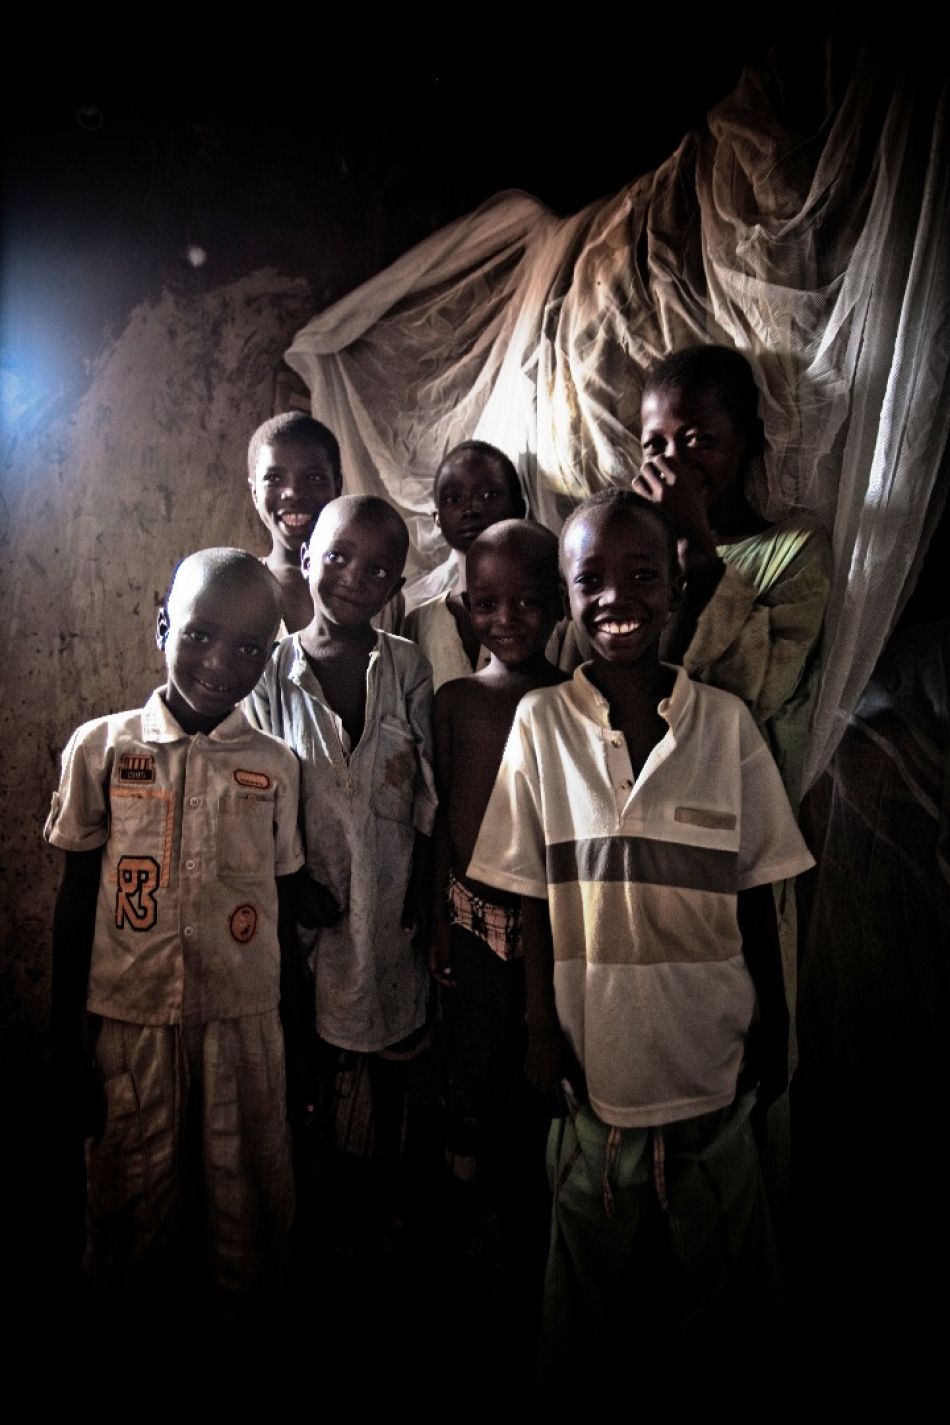 pBack at home a group of boys gather next to their new net SuNMaP and other international partners have reached many atrisk communities in Nigeria through mass net distributions but it is imperative that the international community continues to support Nigeria in its efforts to prevent malaria deaths Mass net distributions are excellent for bringing protection from malaria to a rapid high across the country but it is what happens after the distribution has ended that will show whether or not there will be a long term positive impactp